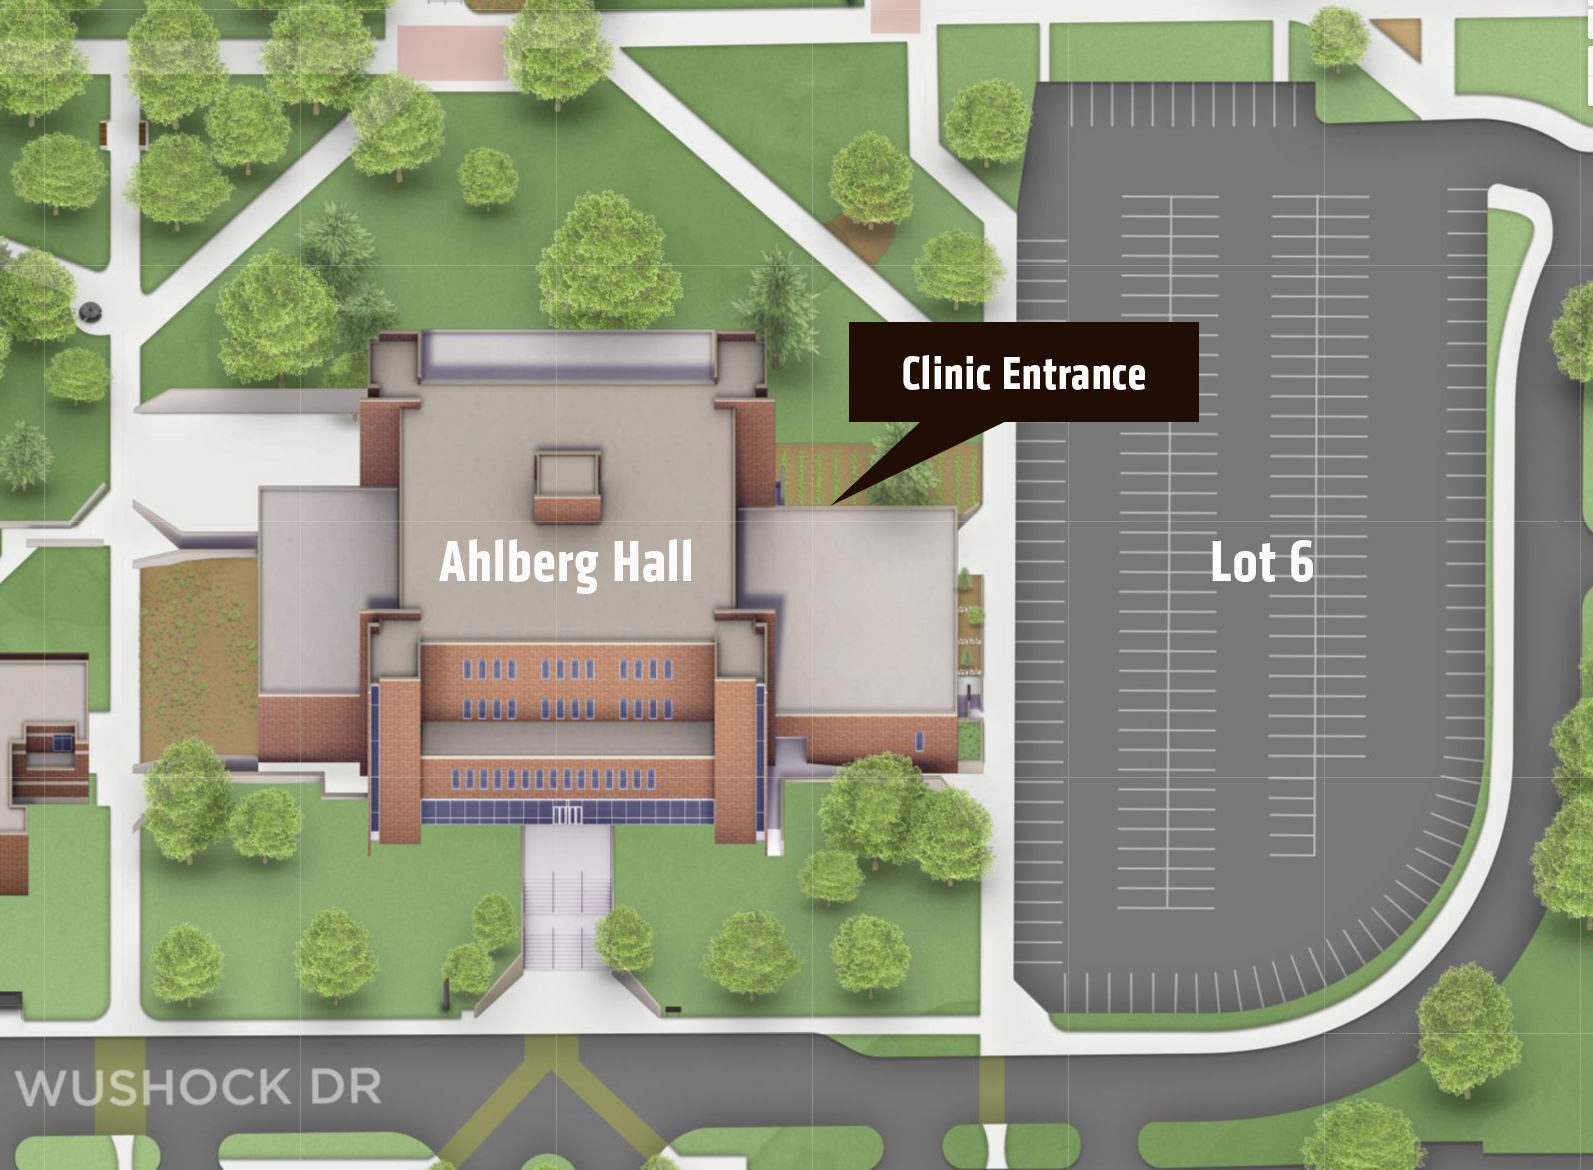 Ahlberg Hall map showing Parking Lot 6 and the Clinic Entrance.